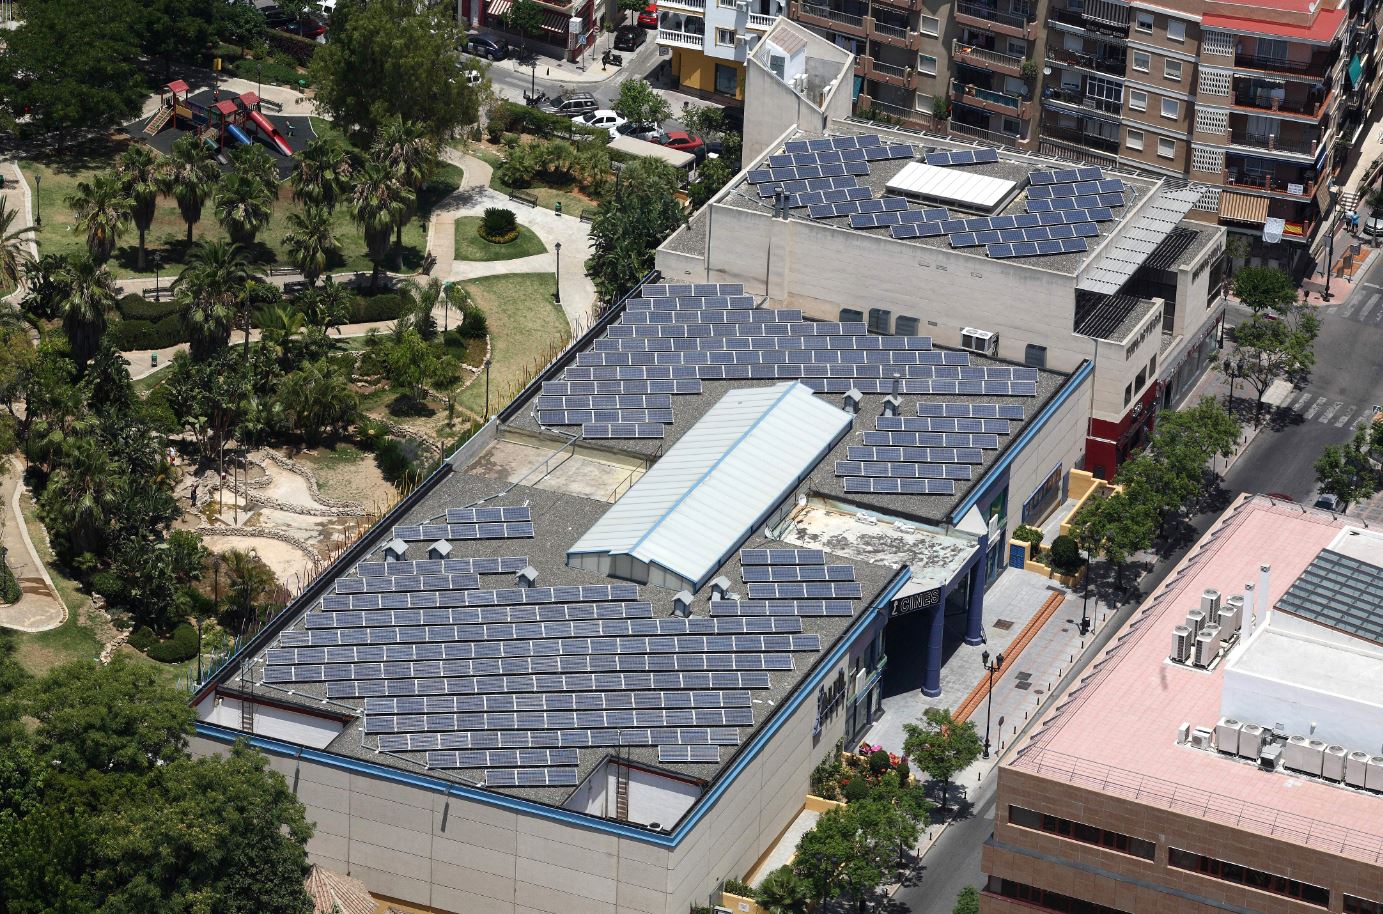 Fuengirola municipal roofs concession for the construction and operation of photovoltaic facilities